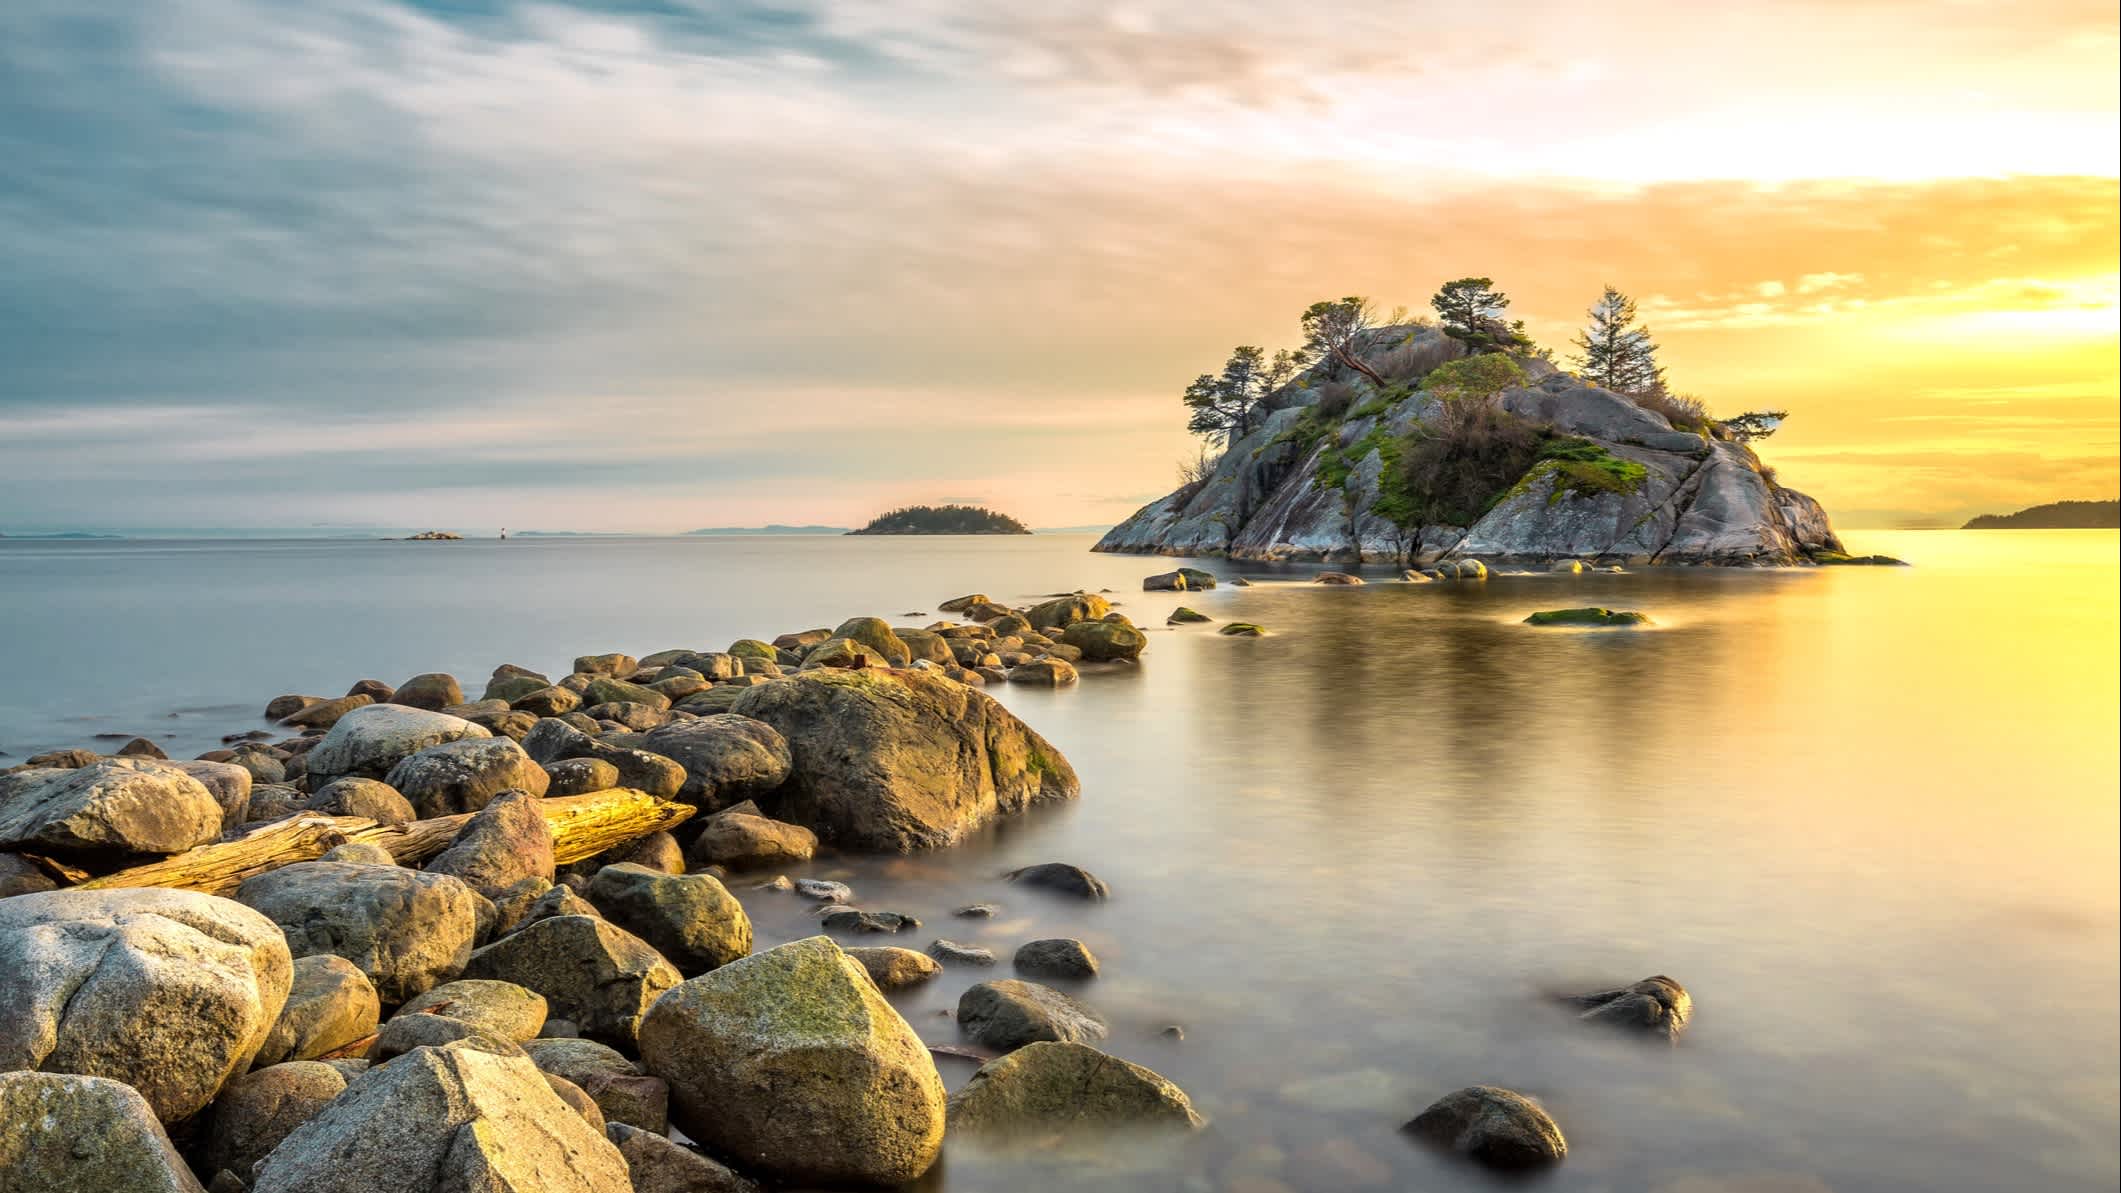 Whyte Islet Park, West Vancouver, Canada